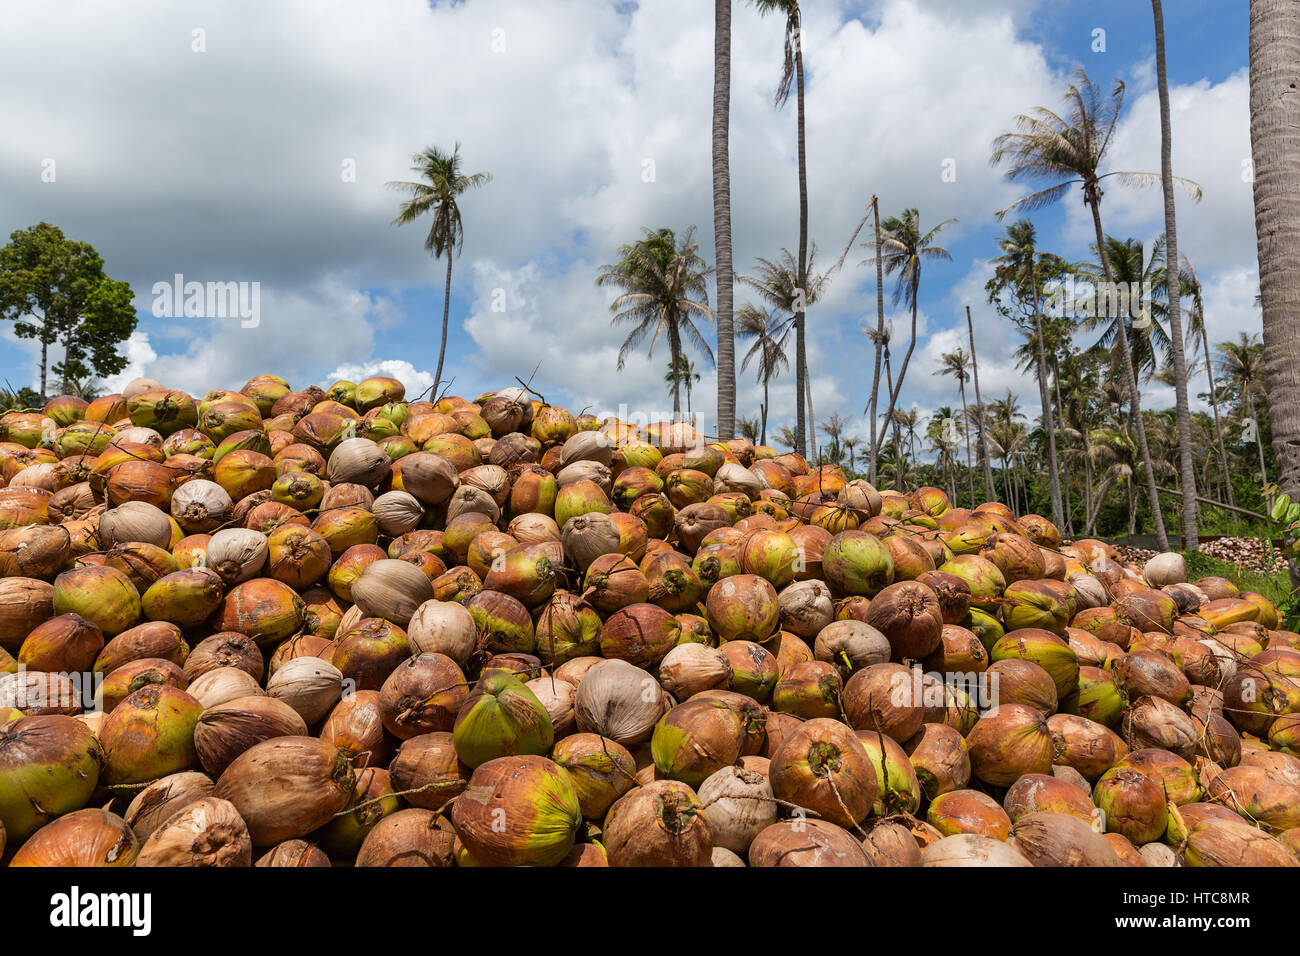 Crop of coconut in Thailand, a large pile on the ground Stock Photo